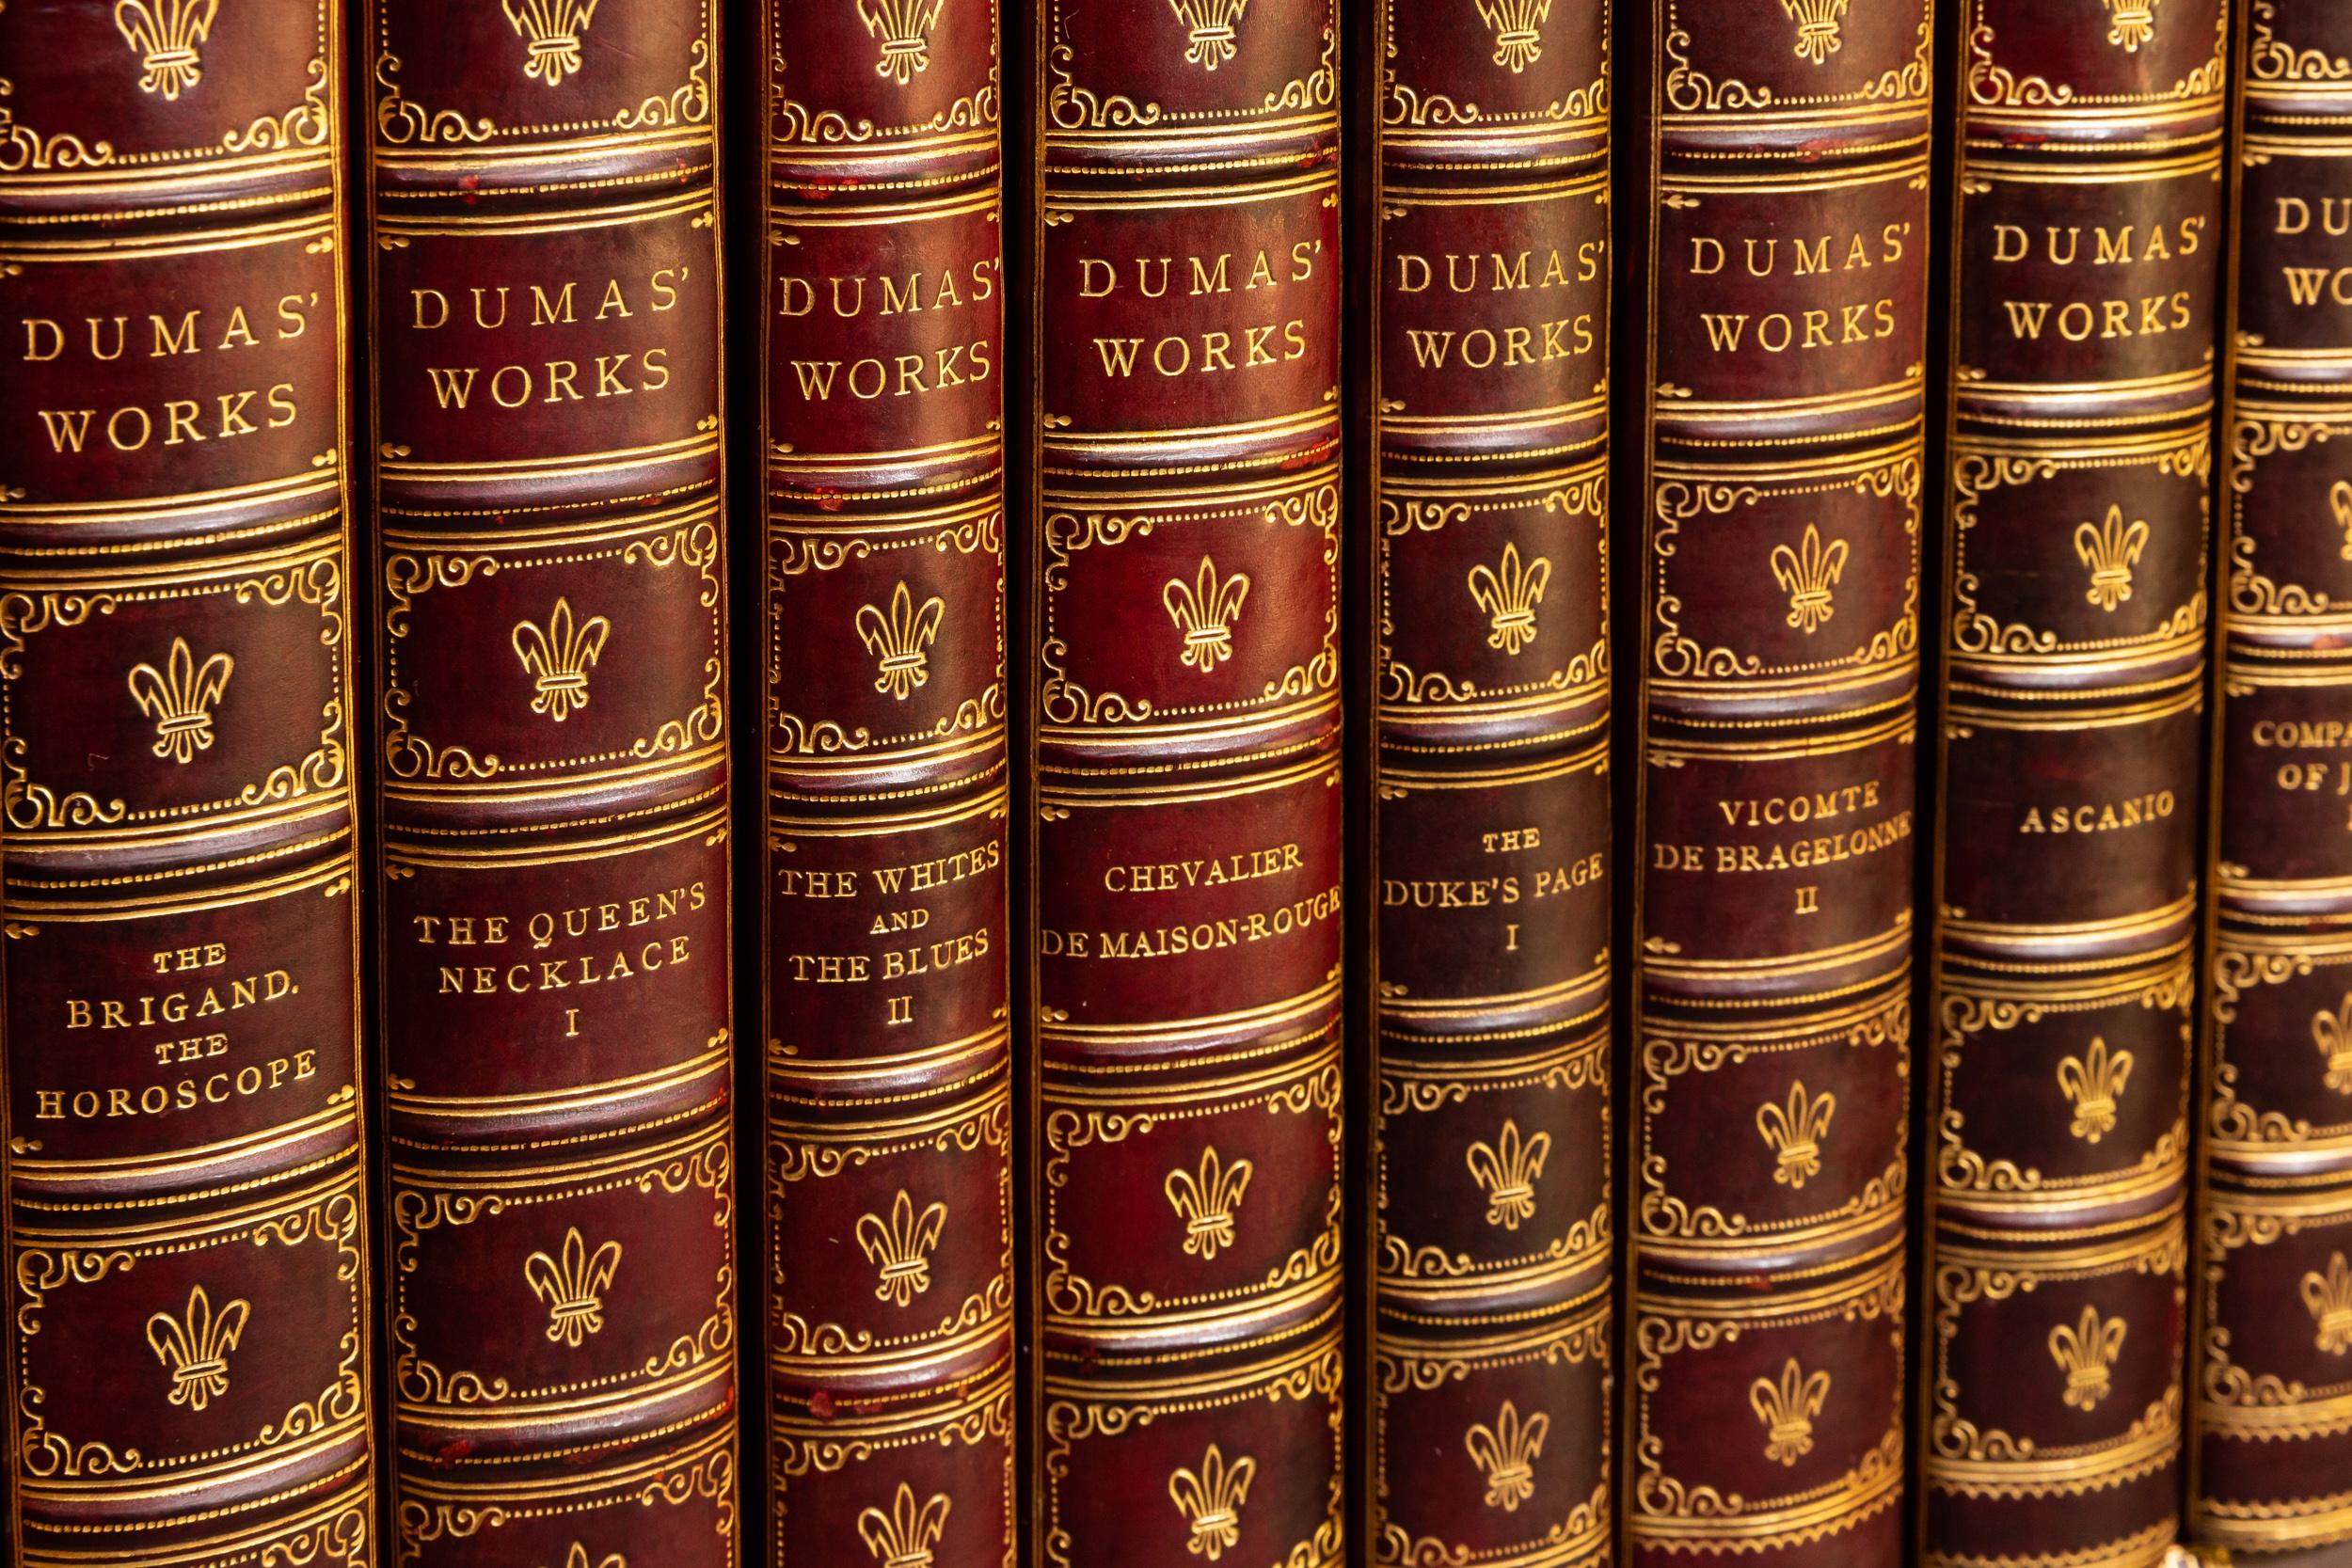 48 Volumes. Alexandre Dumas, Works of Alexandre Dumas. Bound by Bayntun in 1/2 red calf. Marbled boards. Marbled endpapers. Raised bands. Top edges gilt. Published: London; J.M. Dent & Co. 1906.